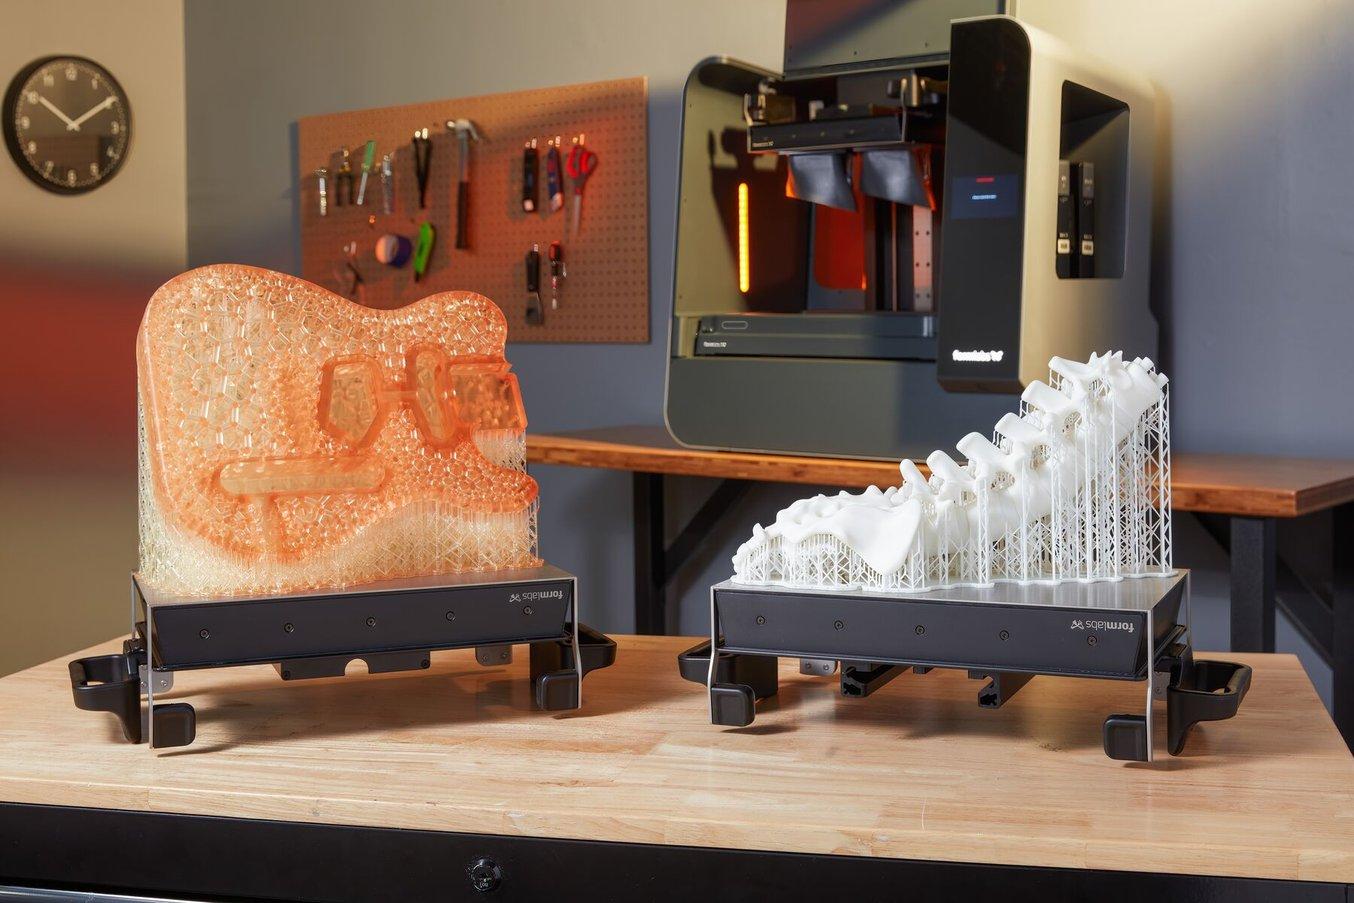 A 3D printed guitar frame and a 3D printed anatomical model of a spine on build platforms sit on a table in front of a Form 3L stereolithography (SLA) 3D printer.